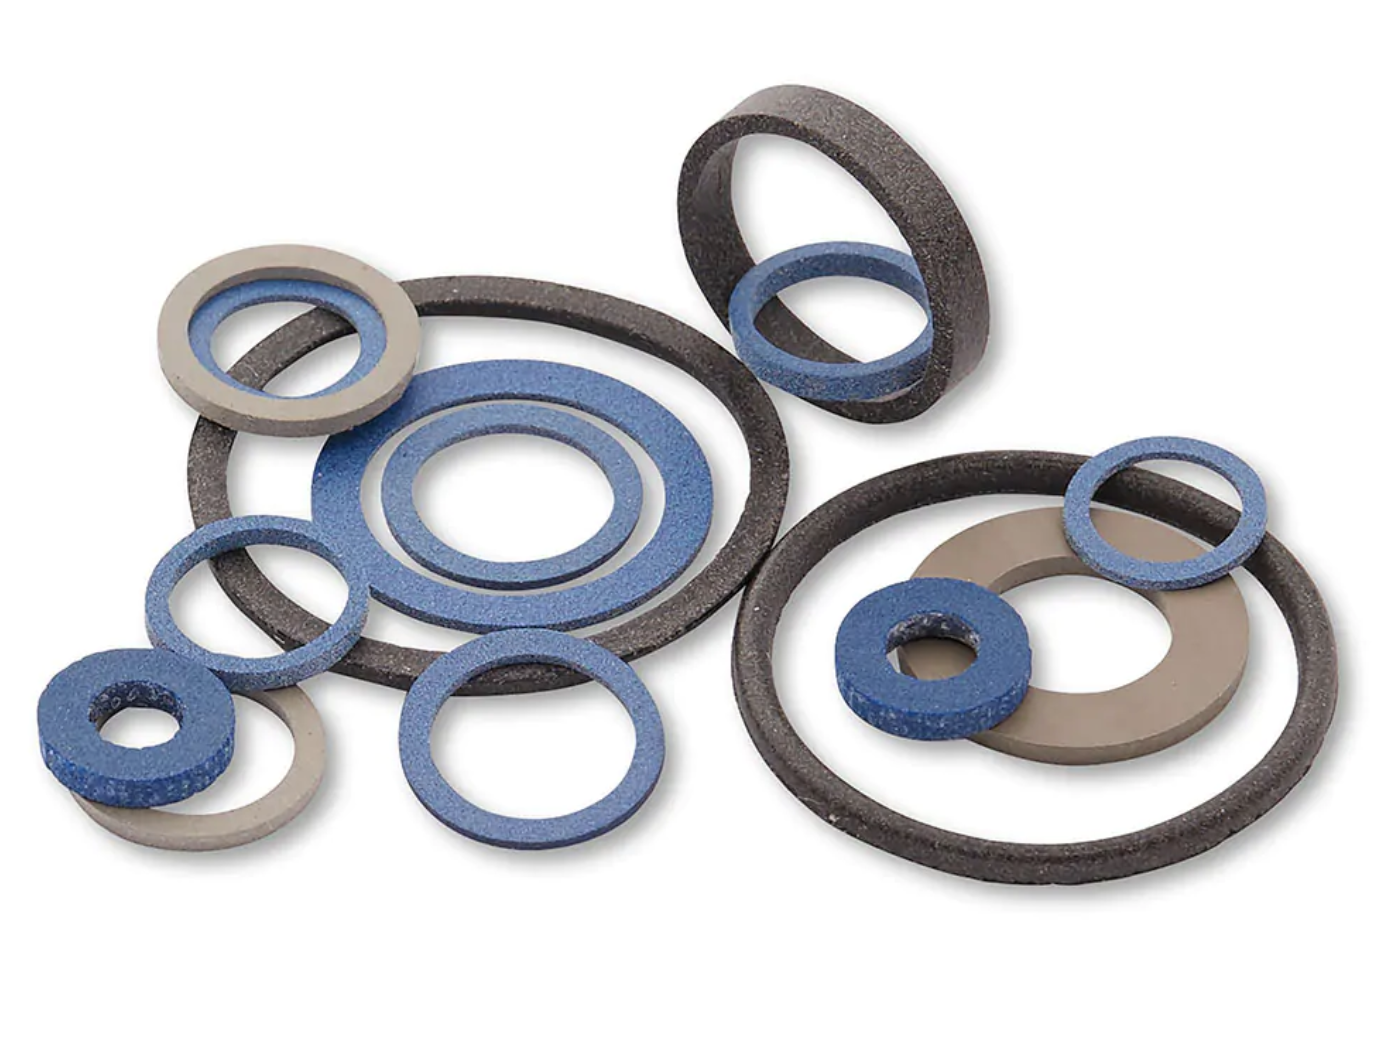 Why Conductive Elastomer Gaskets for EMI Shielding?